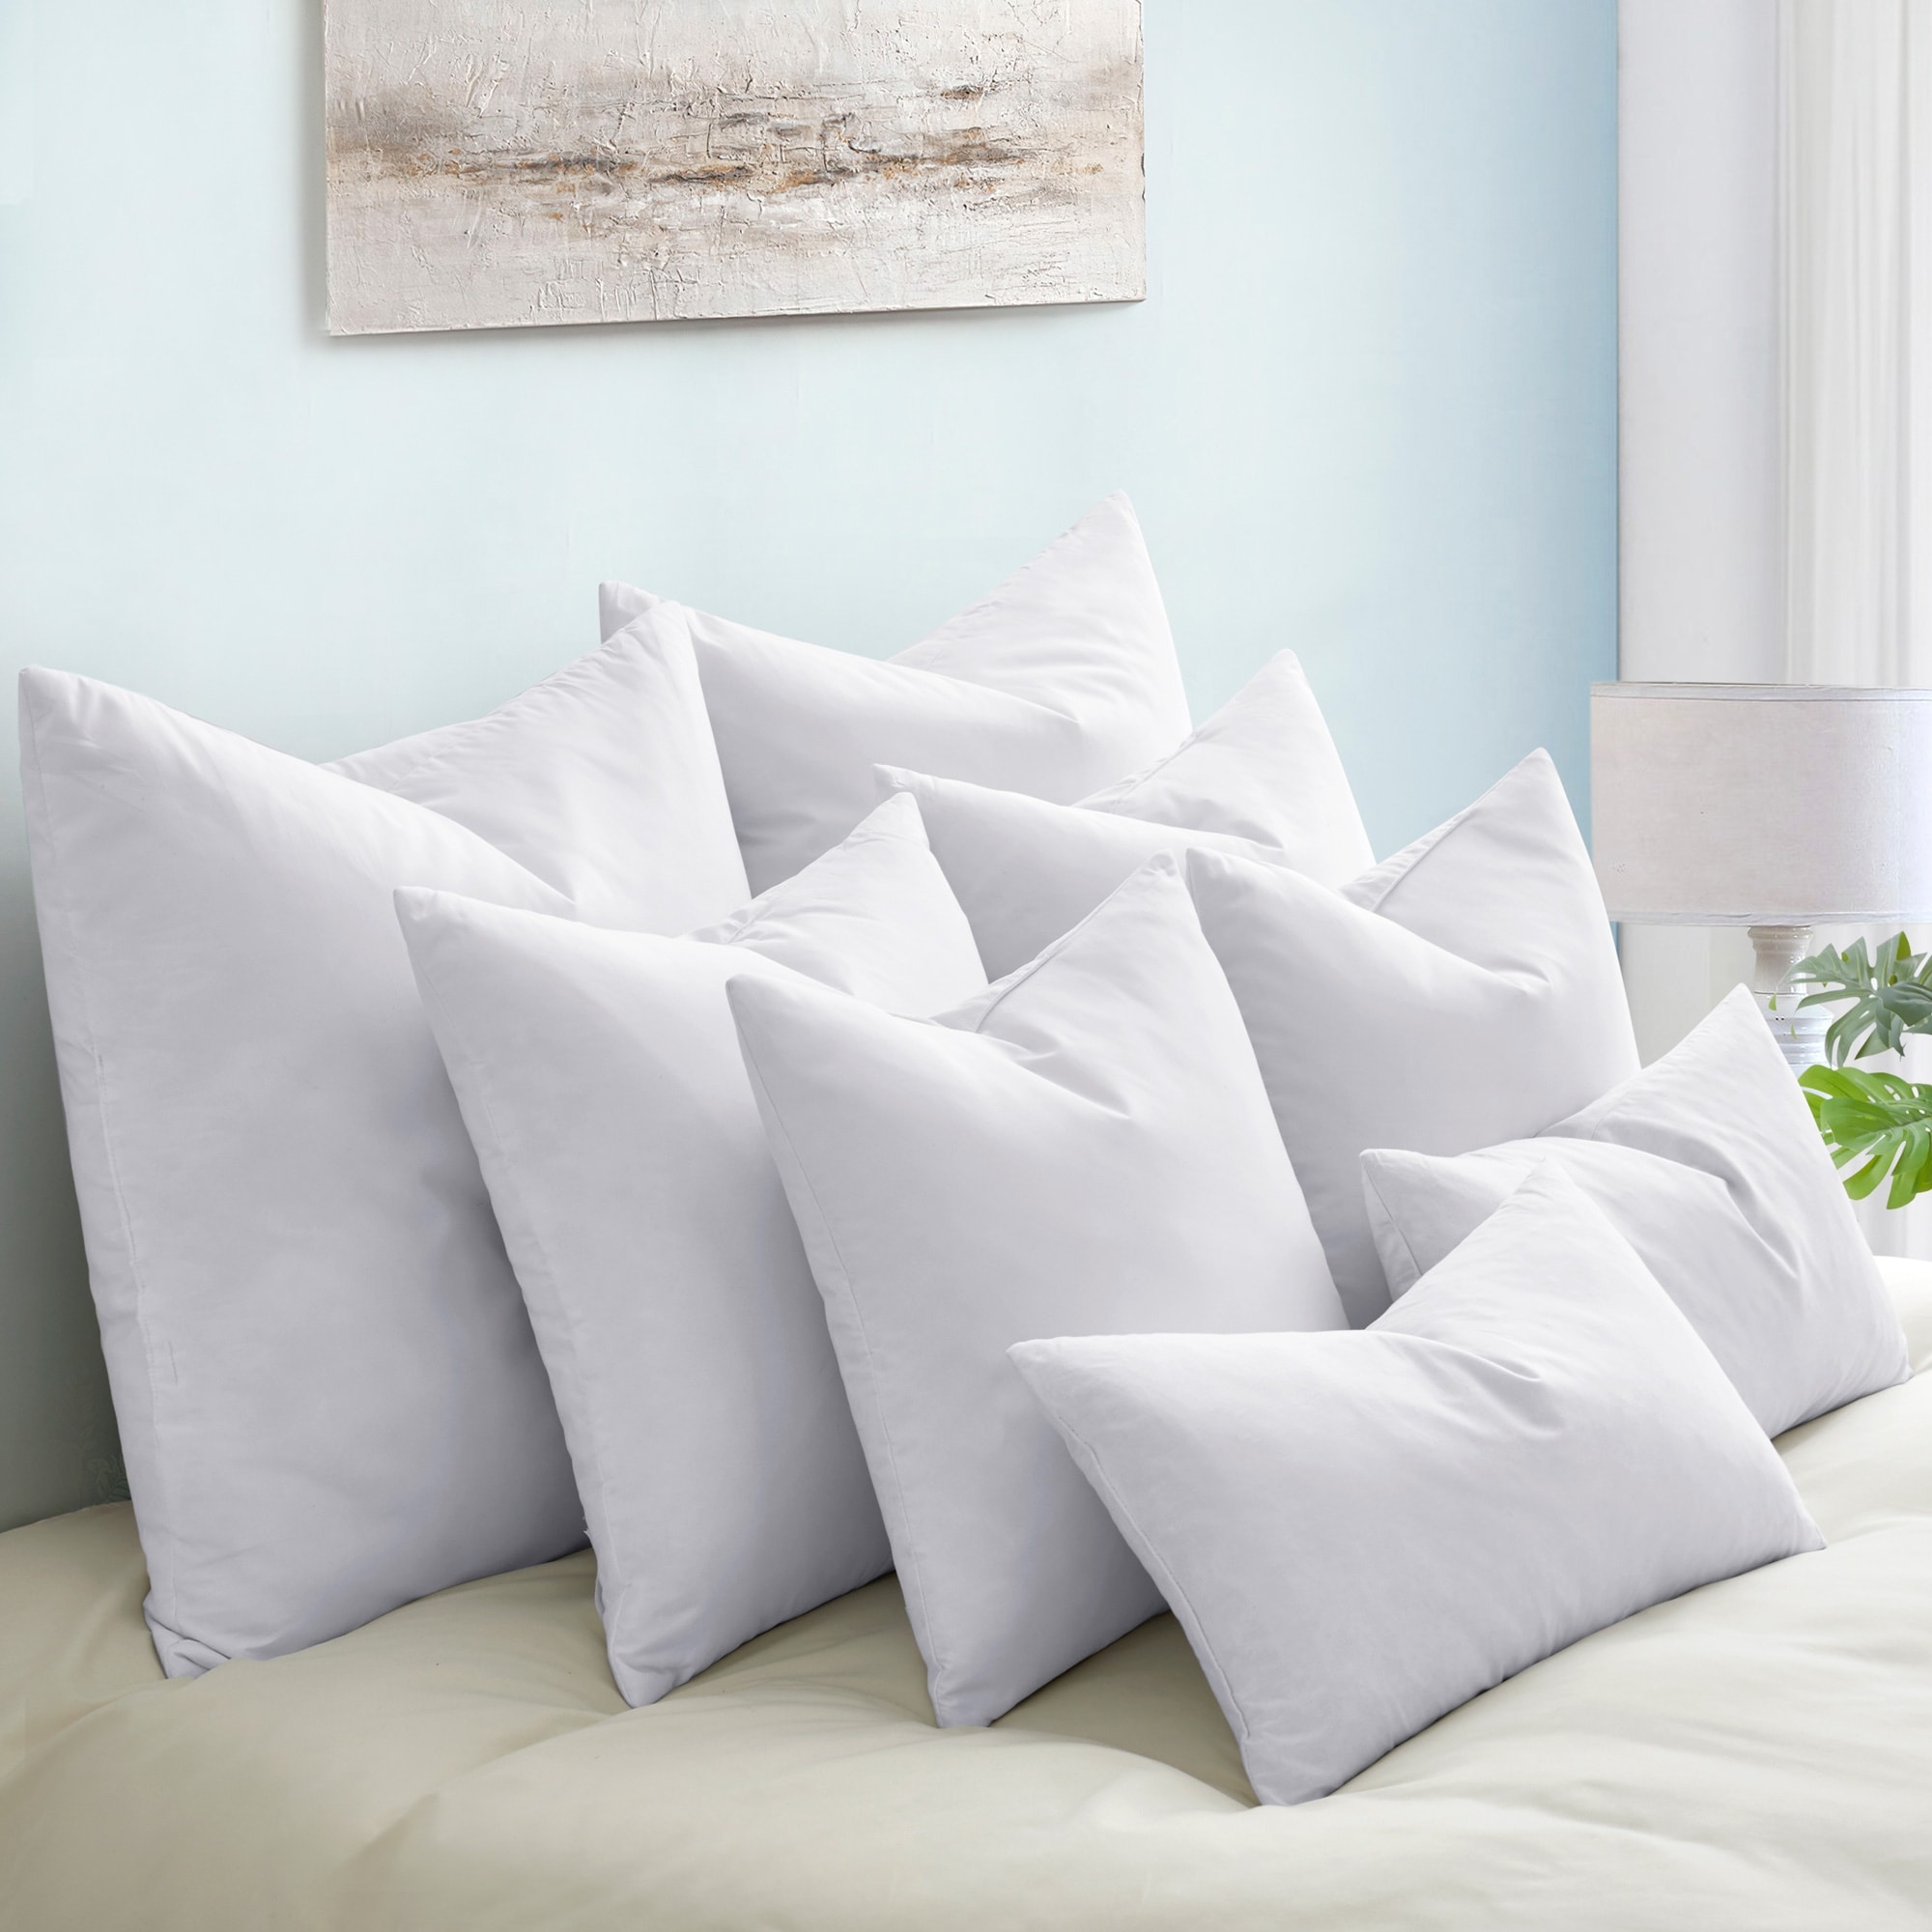 https://ak1.ostkcdn.com/images/products/is/images/direct/64c498cf741d844e6accad2b95af7dc1be45de6a/Feather-Down-Pillow-Inserts-Decorative-Throw-Pillows.jpg